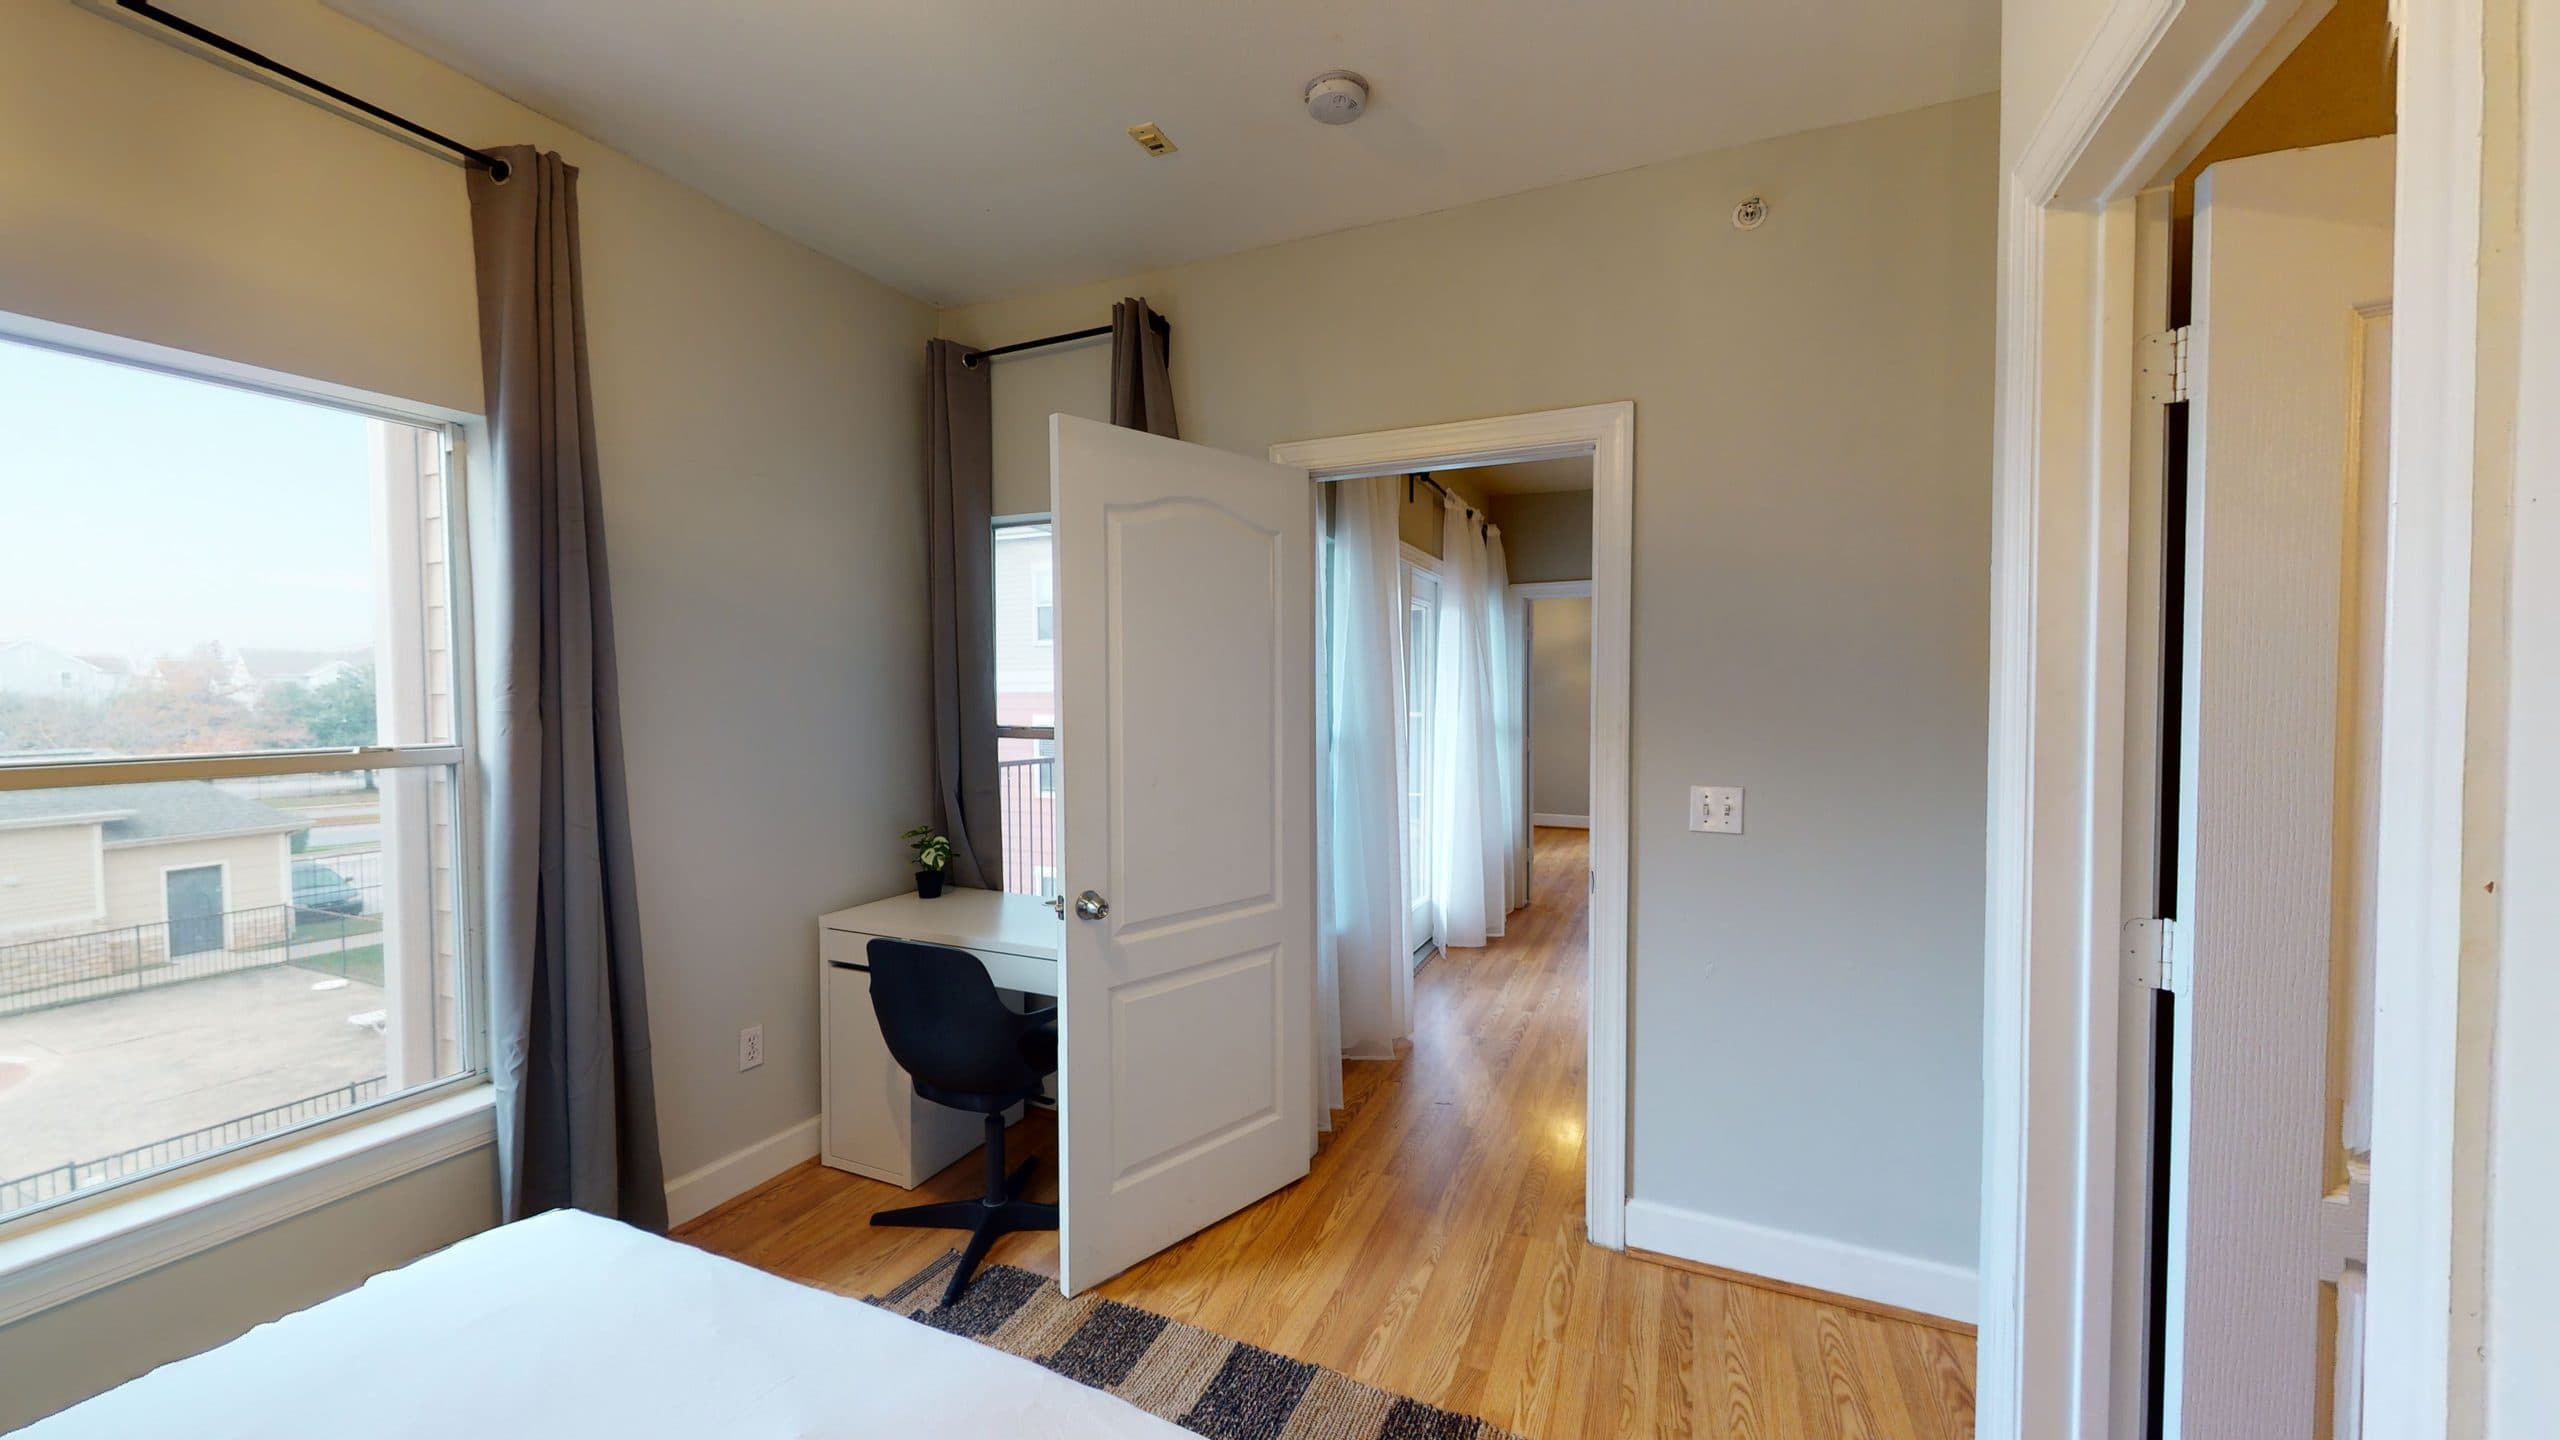 Photo 4 of #2475: Queen Bedroom C w/ Private Bathroom at June Homes